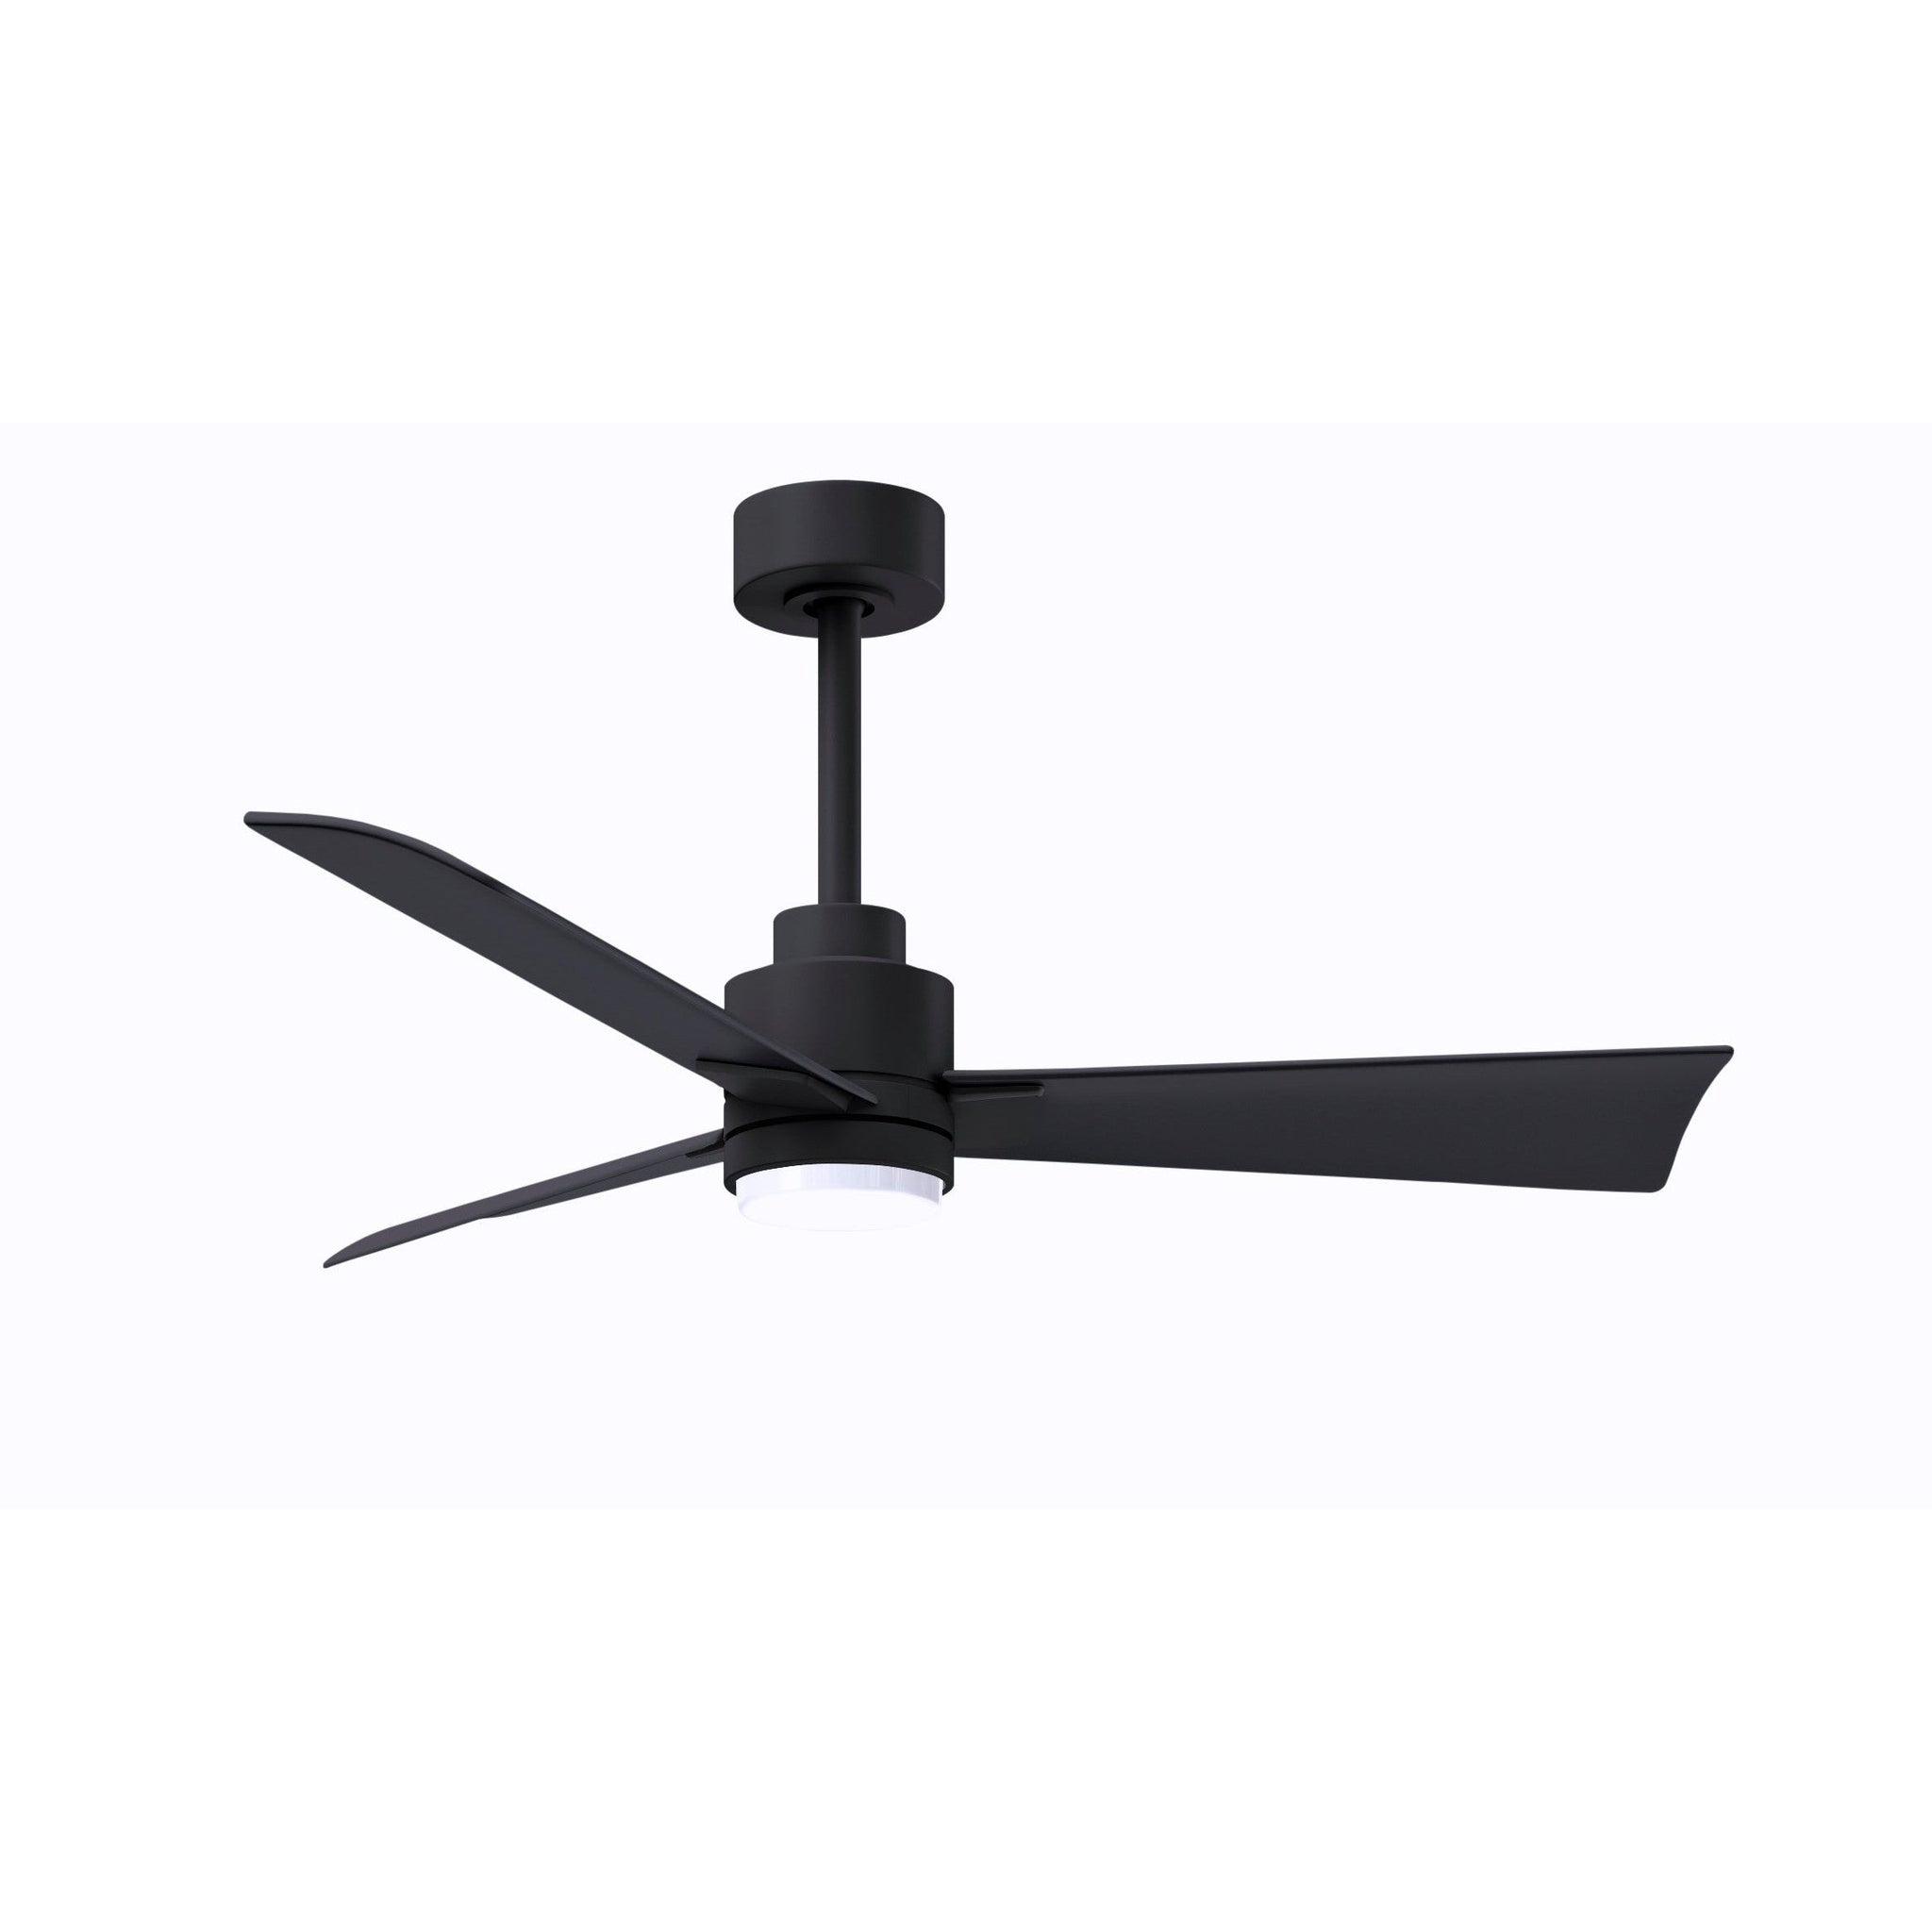 Alessandra 3 Blade Ceiling Fan With Light - Image 1